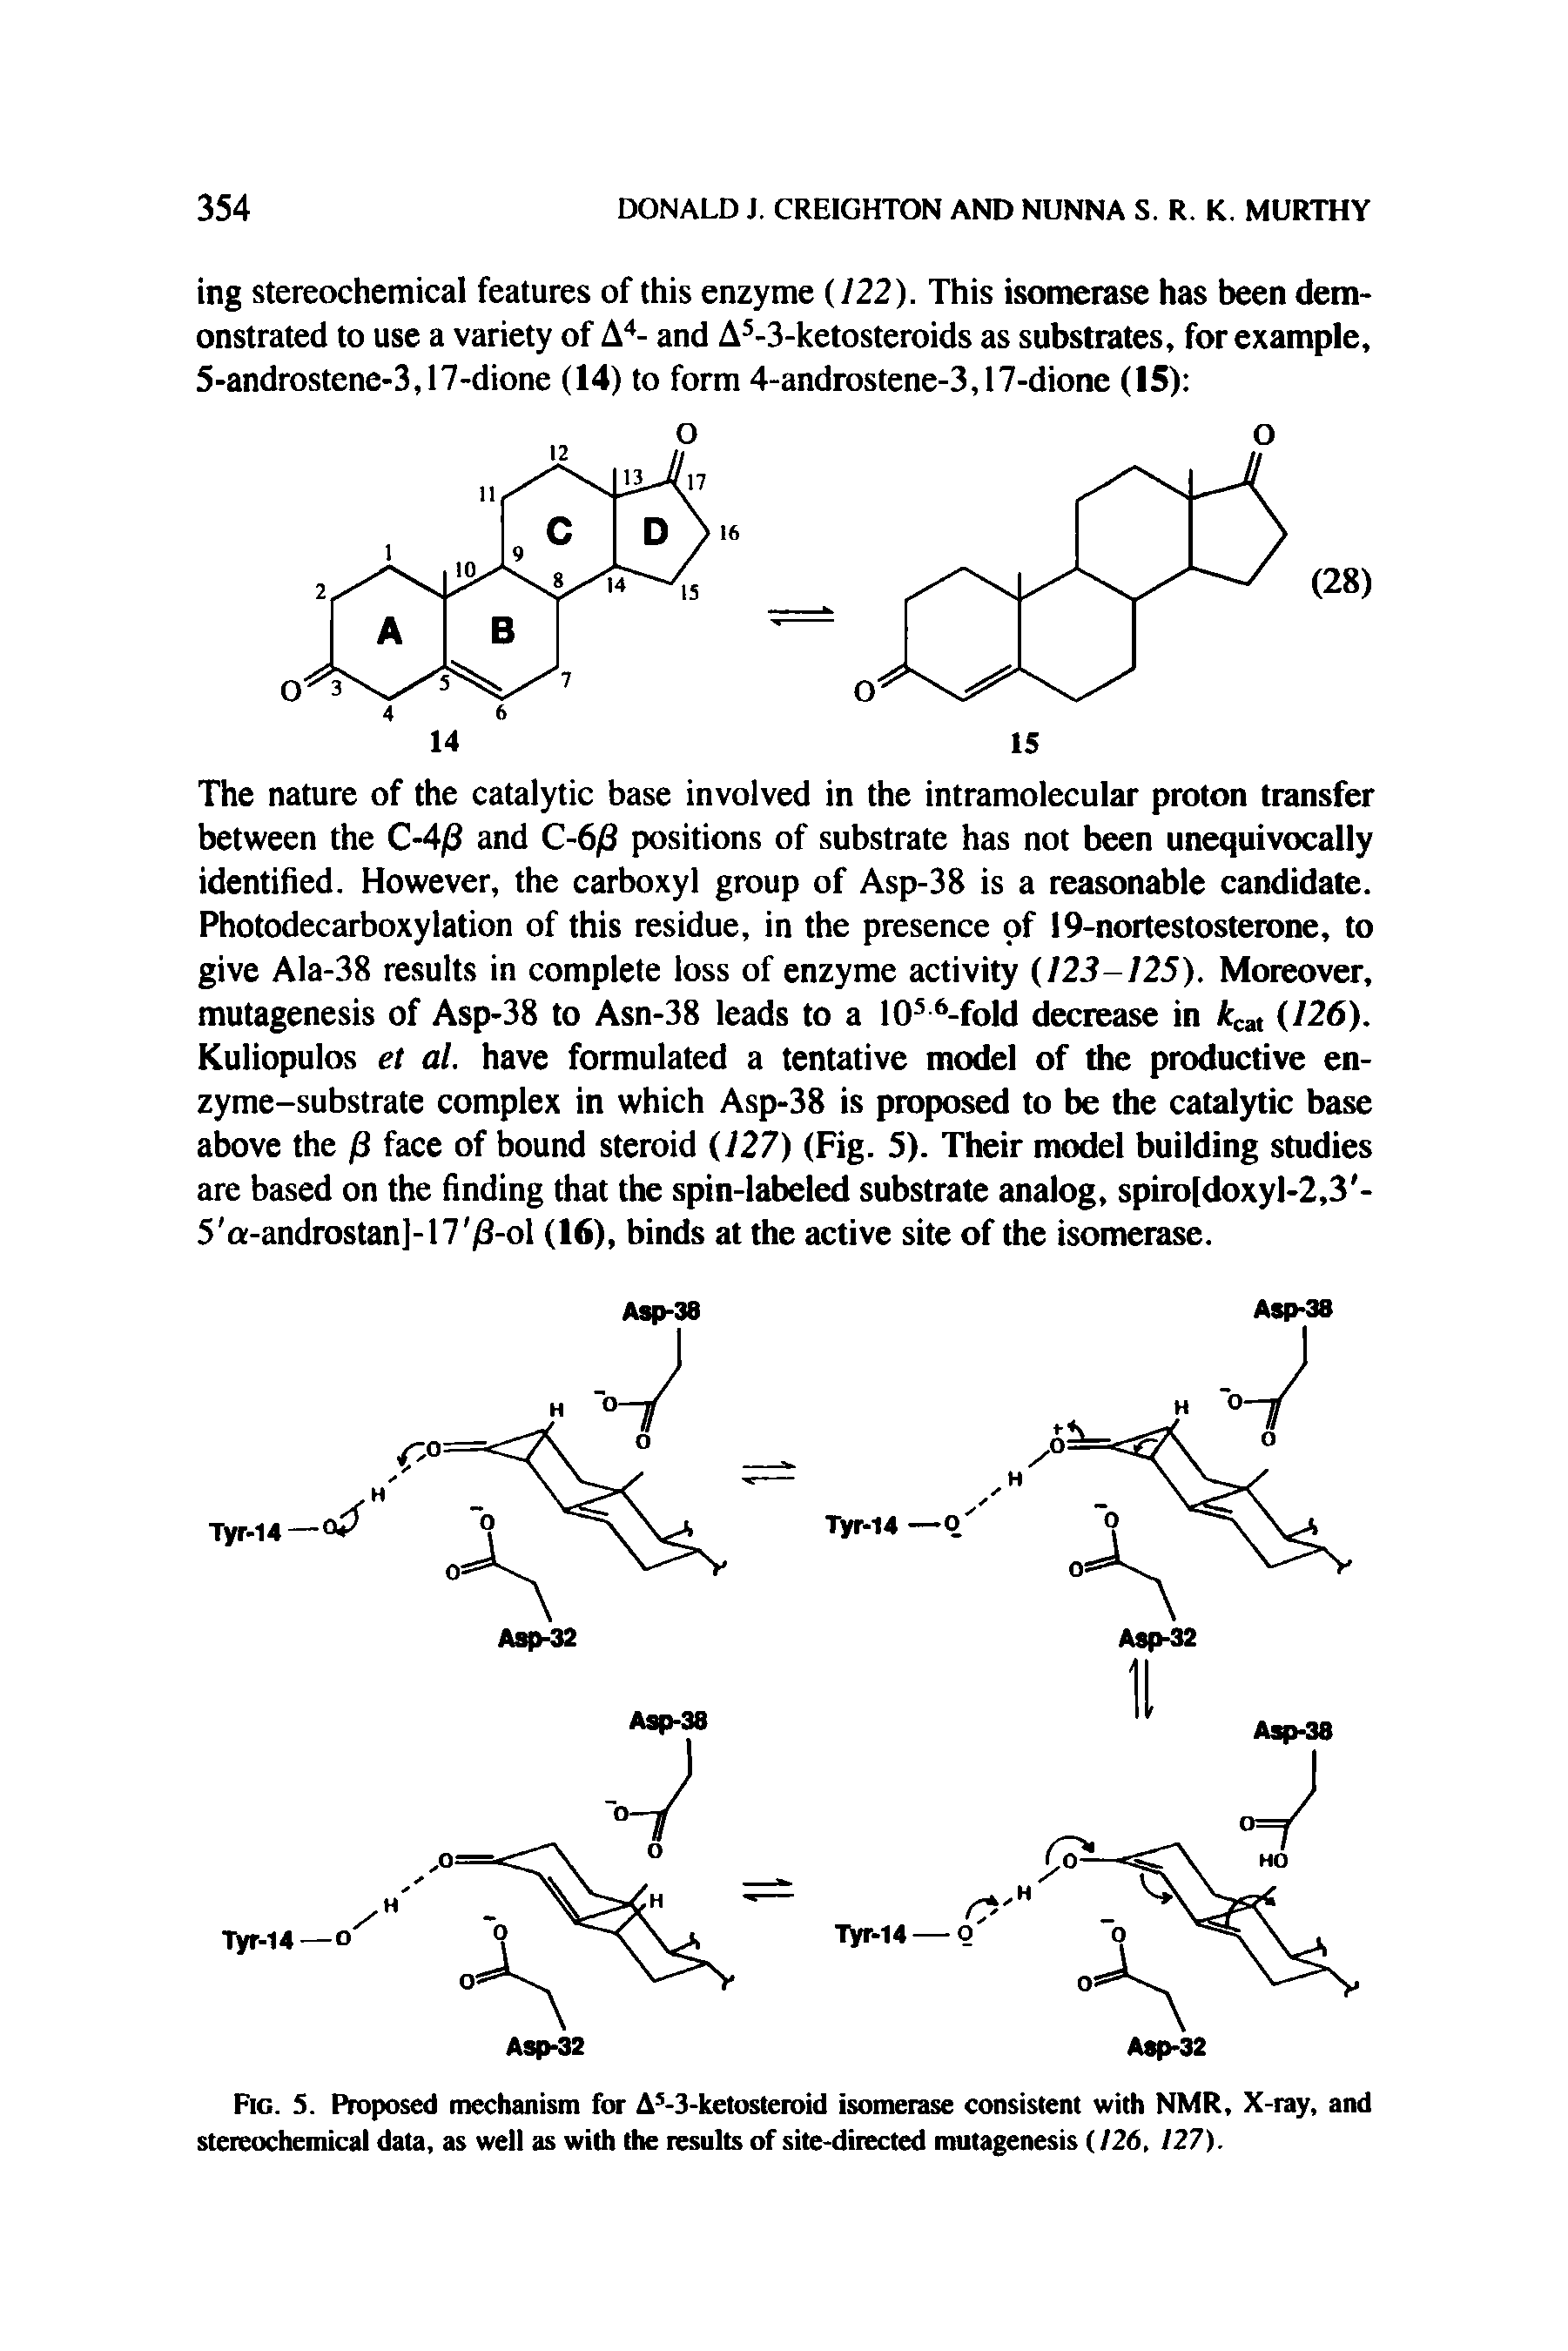 Fig. 5. Proposed mechanism for A -3-ketosteroid isomerase consistent with NMR, X-ray, and stereochemical data, as well as with the results of site-directed mutagenesis (/26, 127).